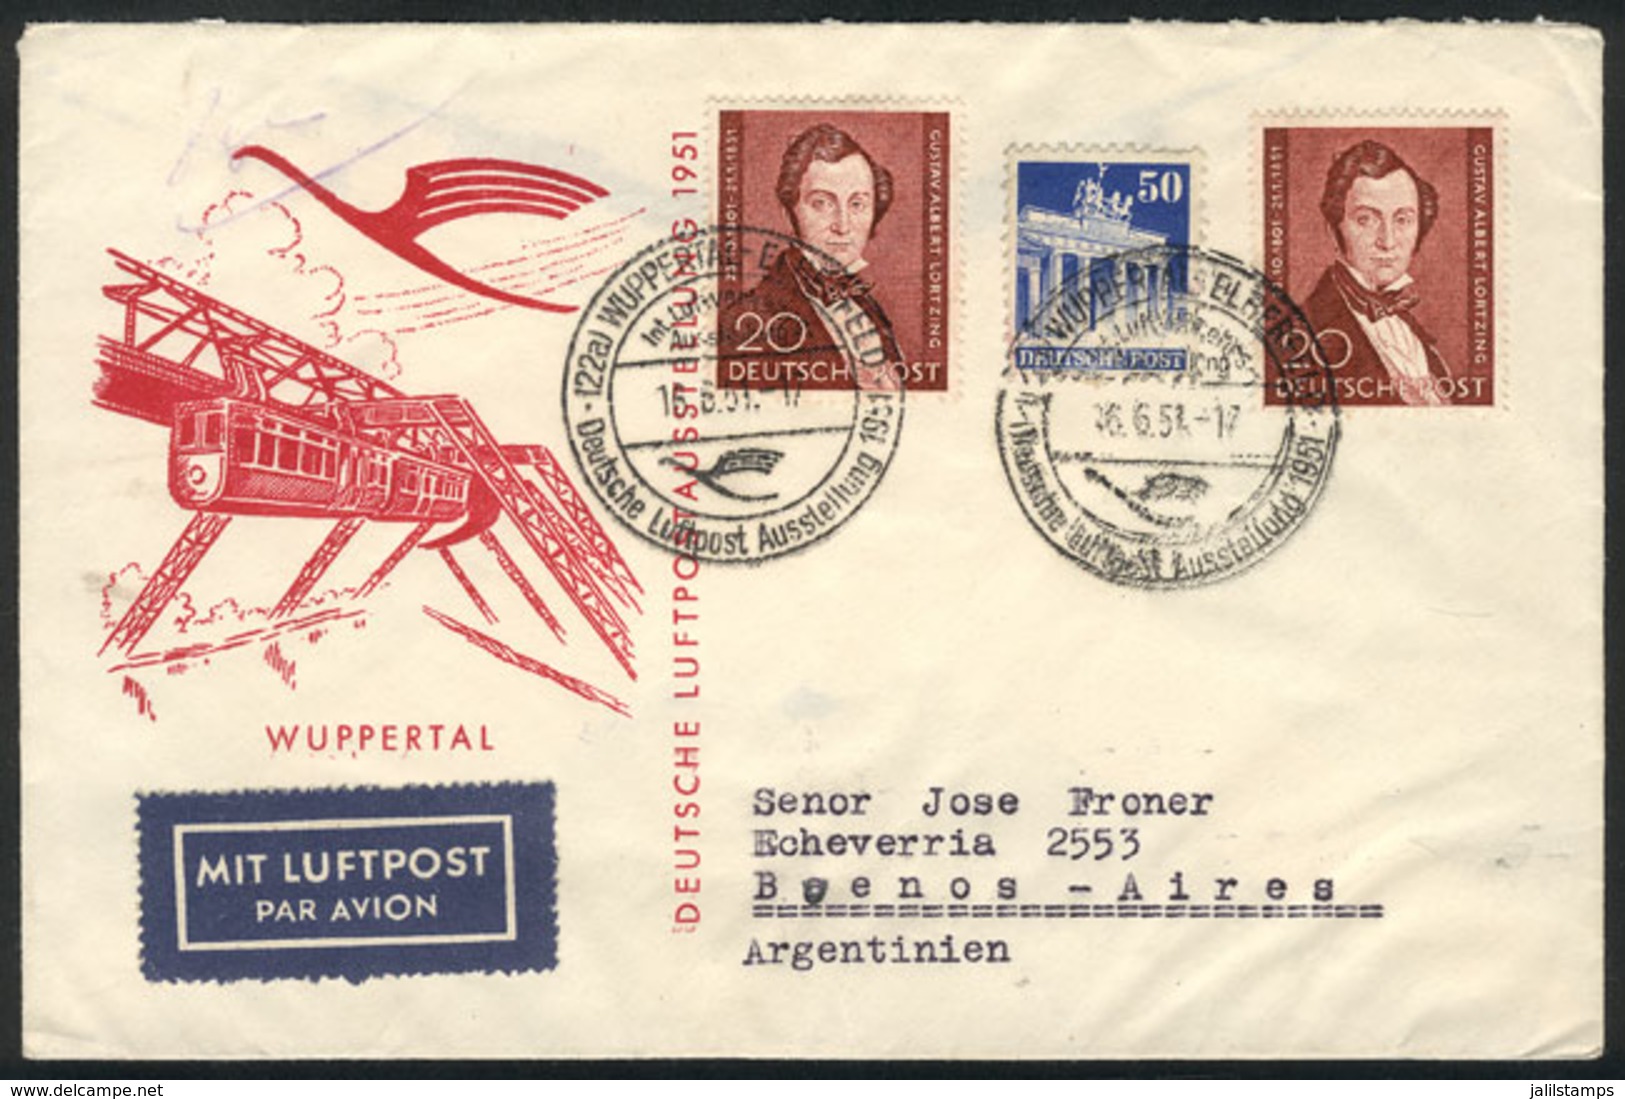 WEST GERMANY: Airmail Cover Sent To Argentina On 16/JUN/1951 With Very Good Postage, Excellent Quality! - Cartas & Documentos